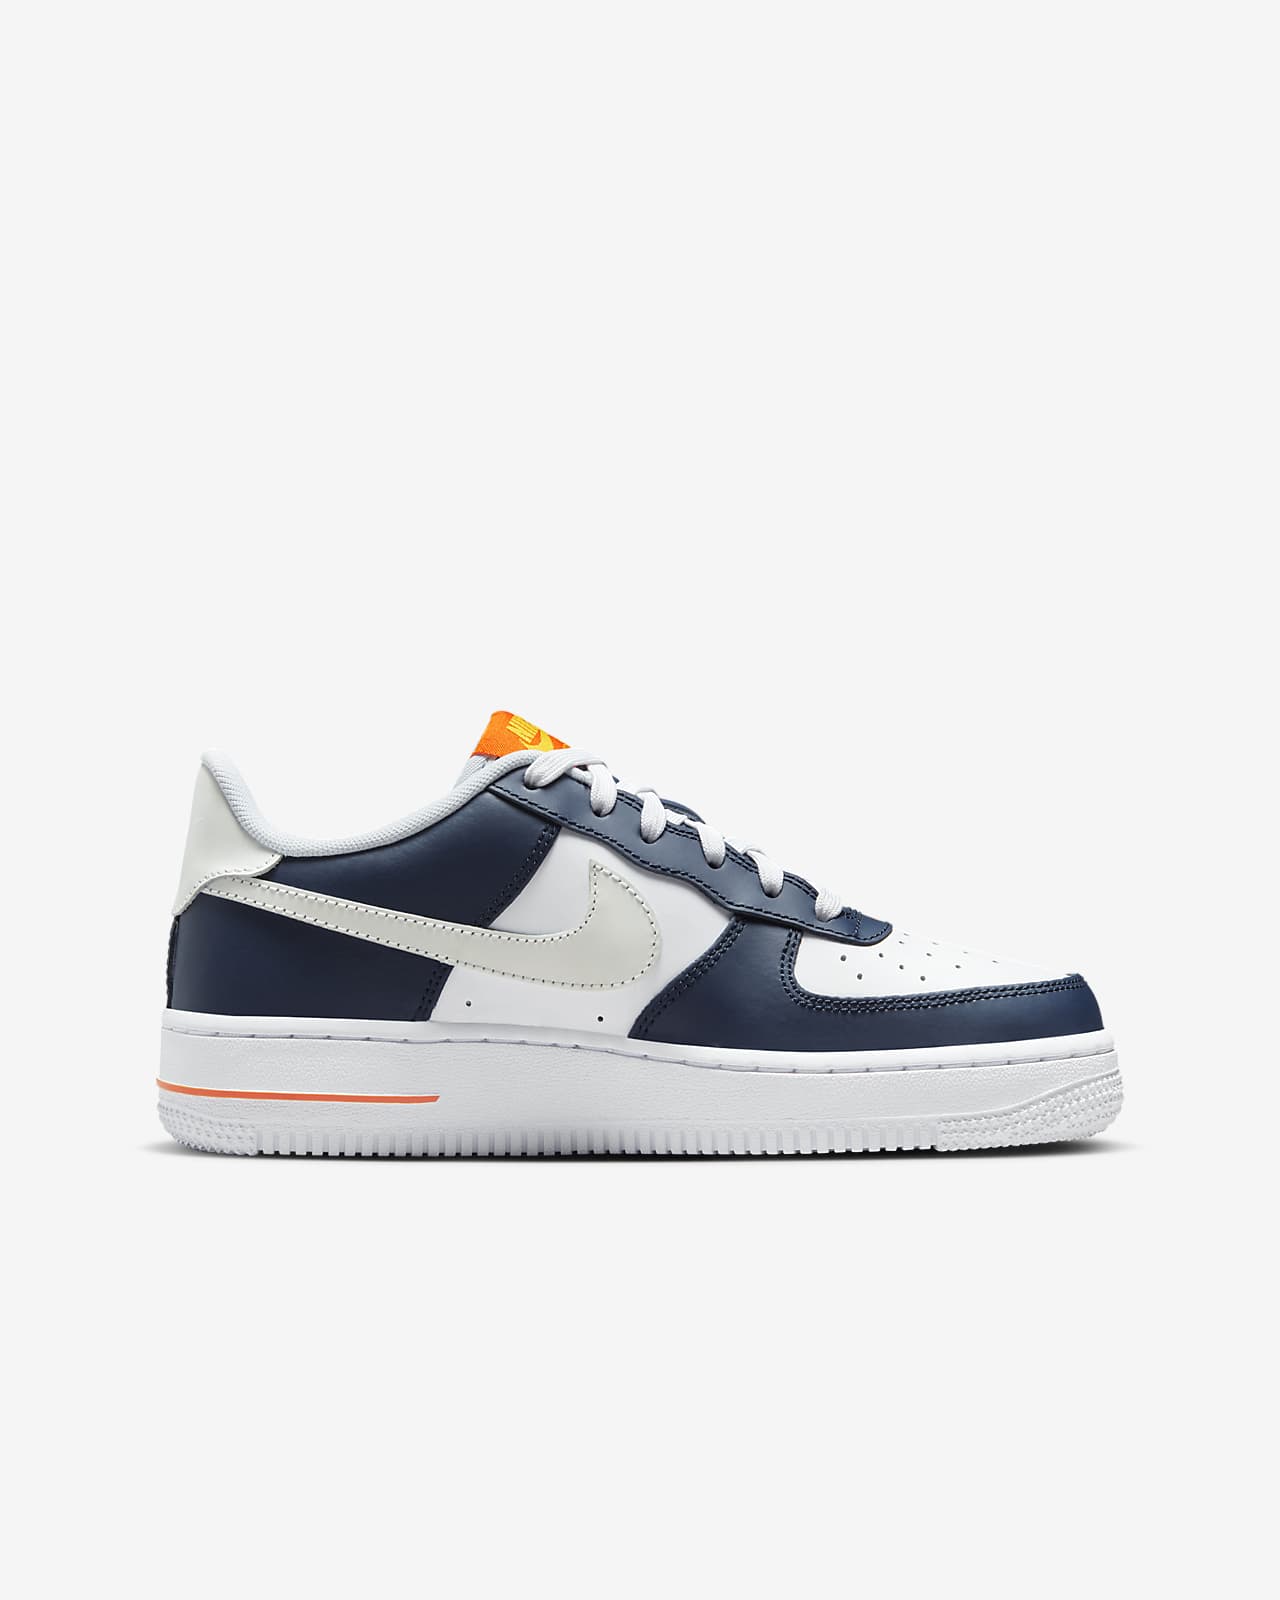 Nike Air Force 1 07 LV8 Mens Basketball Shoes Navy Blue White